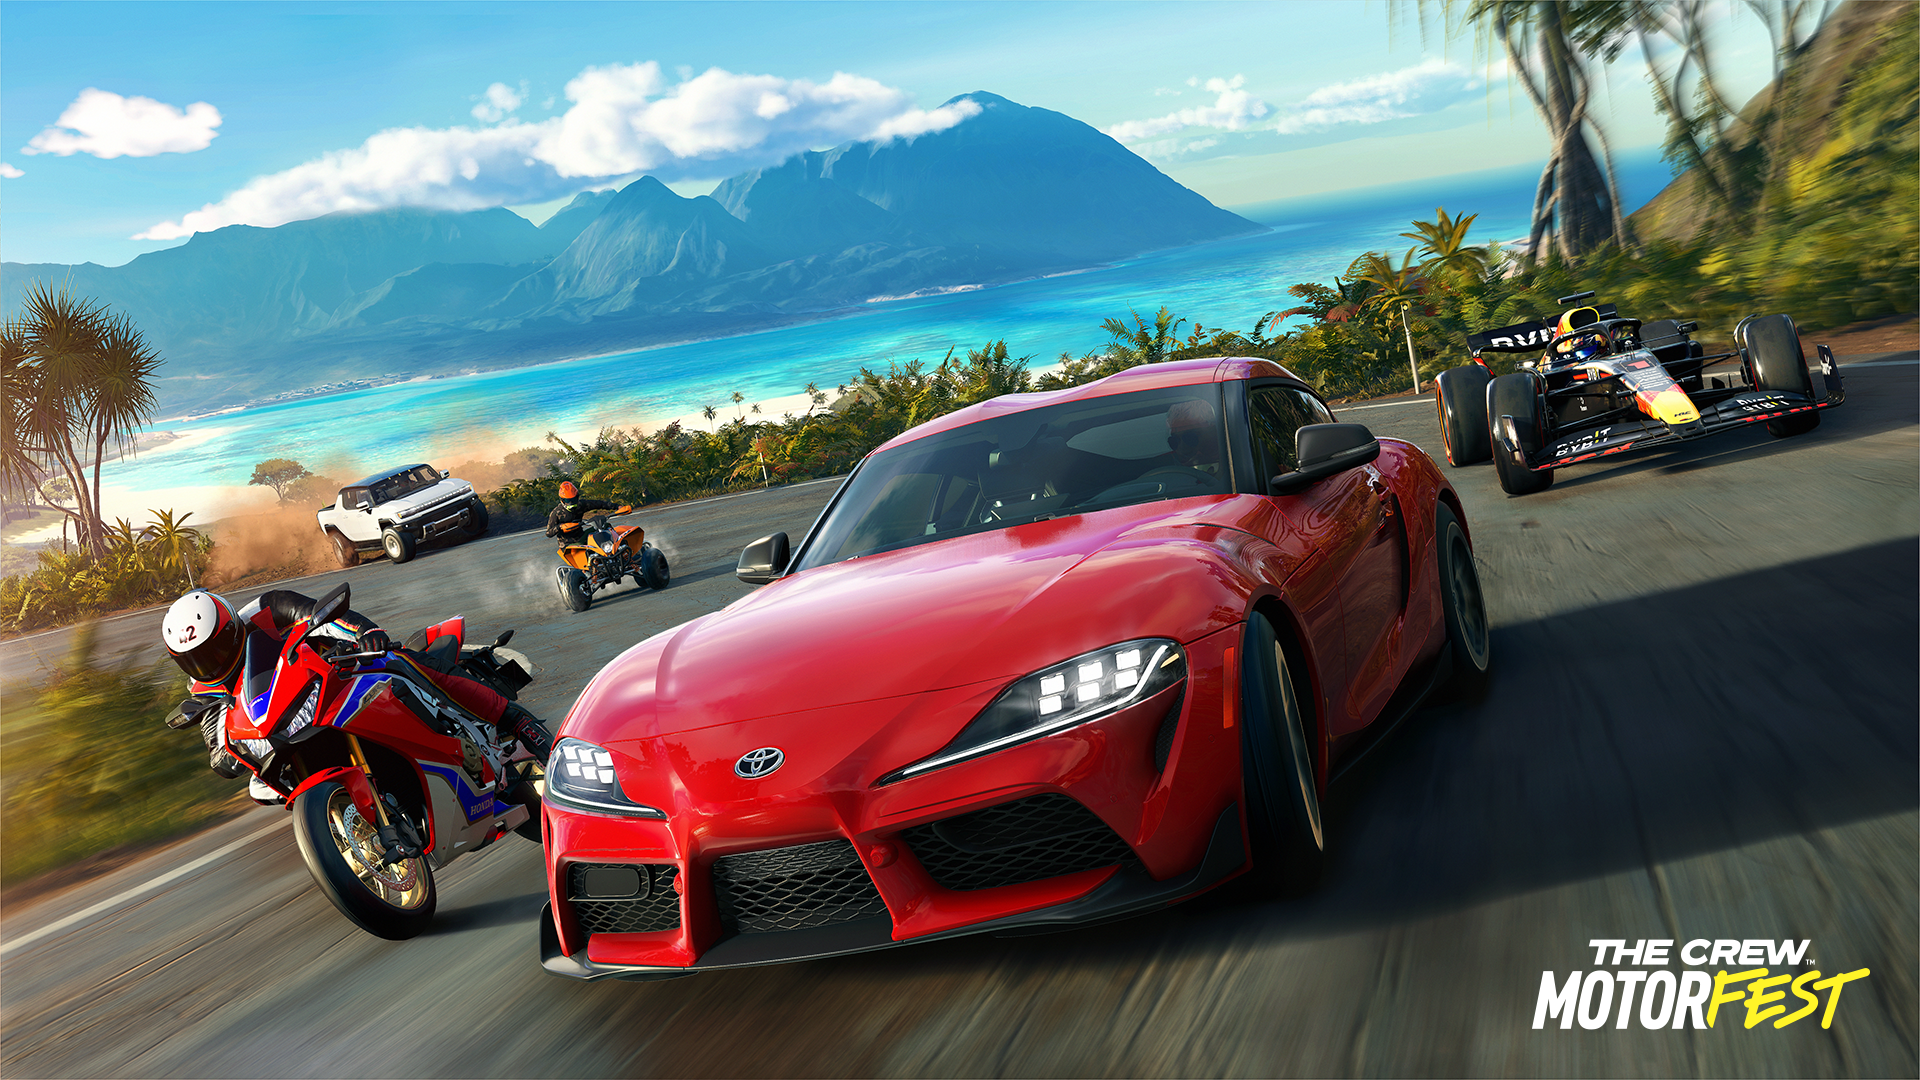 The Crew Motorfest on X: Preorder #TheCrewMotorfest Gold & Ultimate  edition and get 3 days of early access    / X